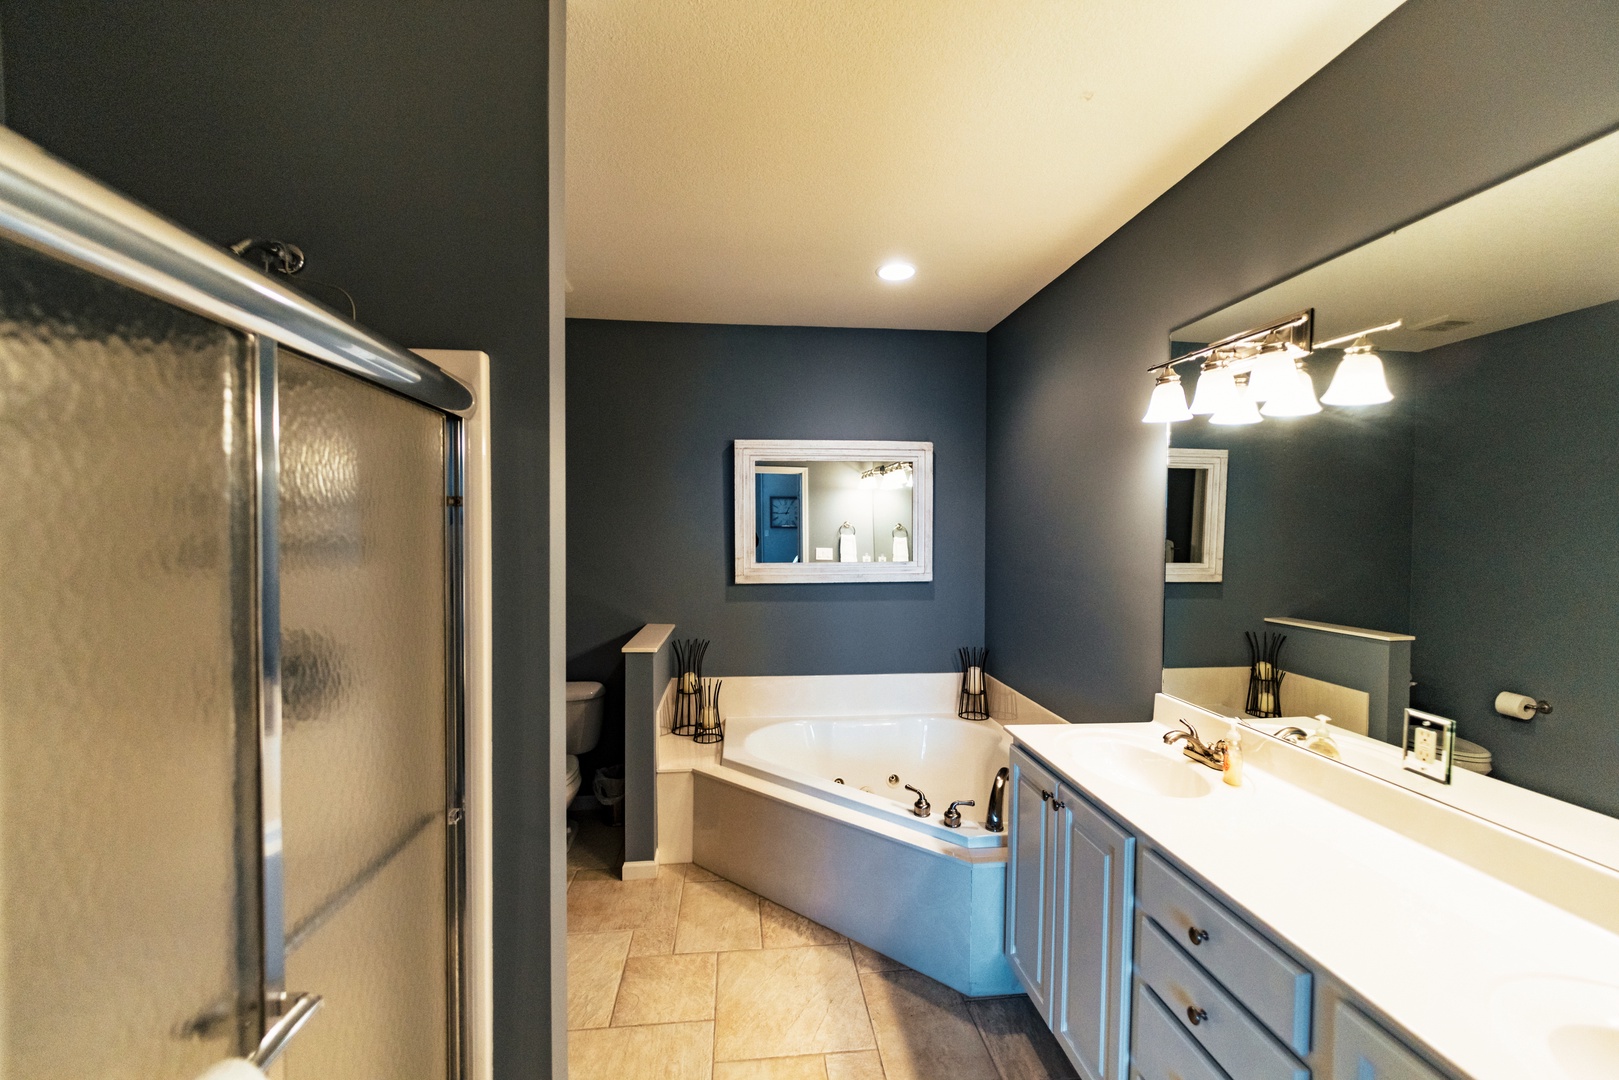 The master ensuite offers a double vanity, shower, & jetted soaking tub